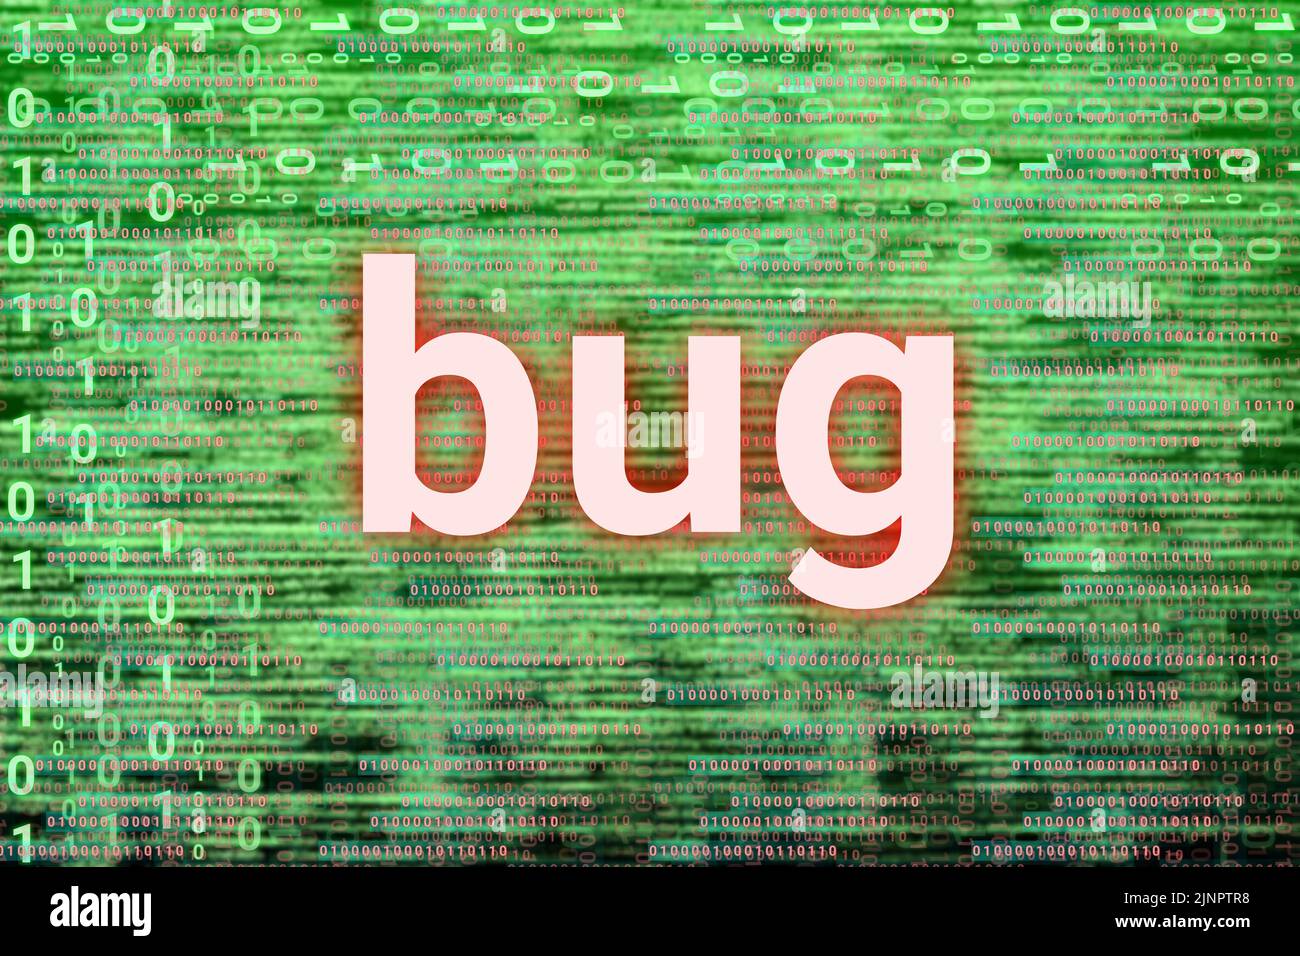 bug in computer illustration image with blue code lines. concept for computer security, service and error. Stock Photo